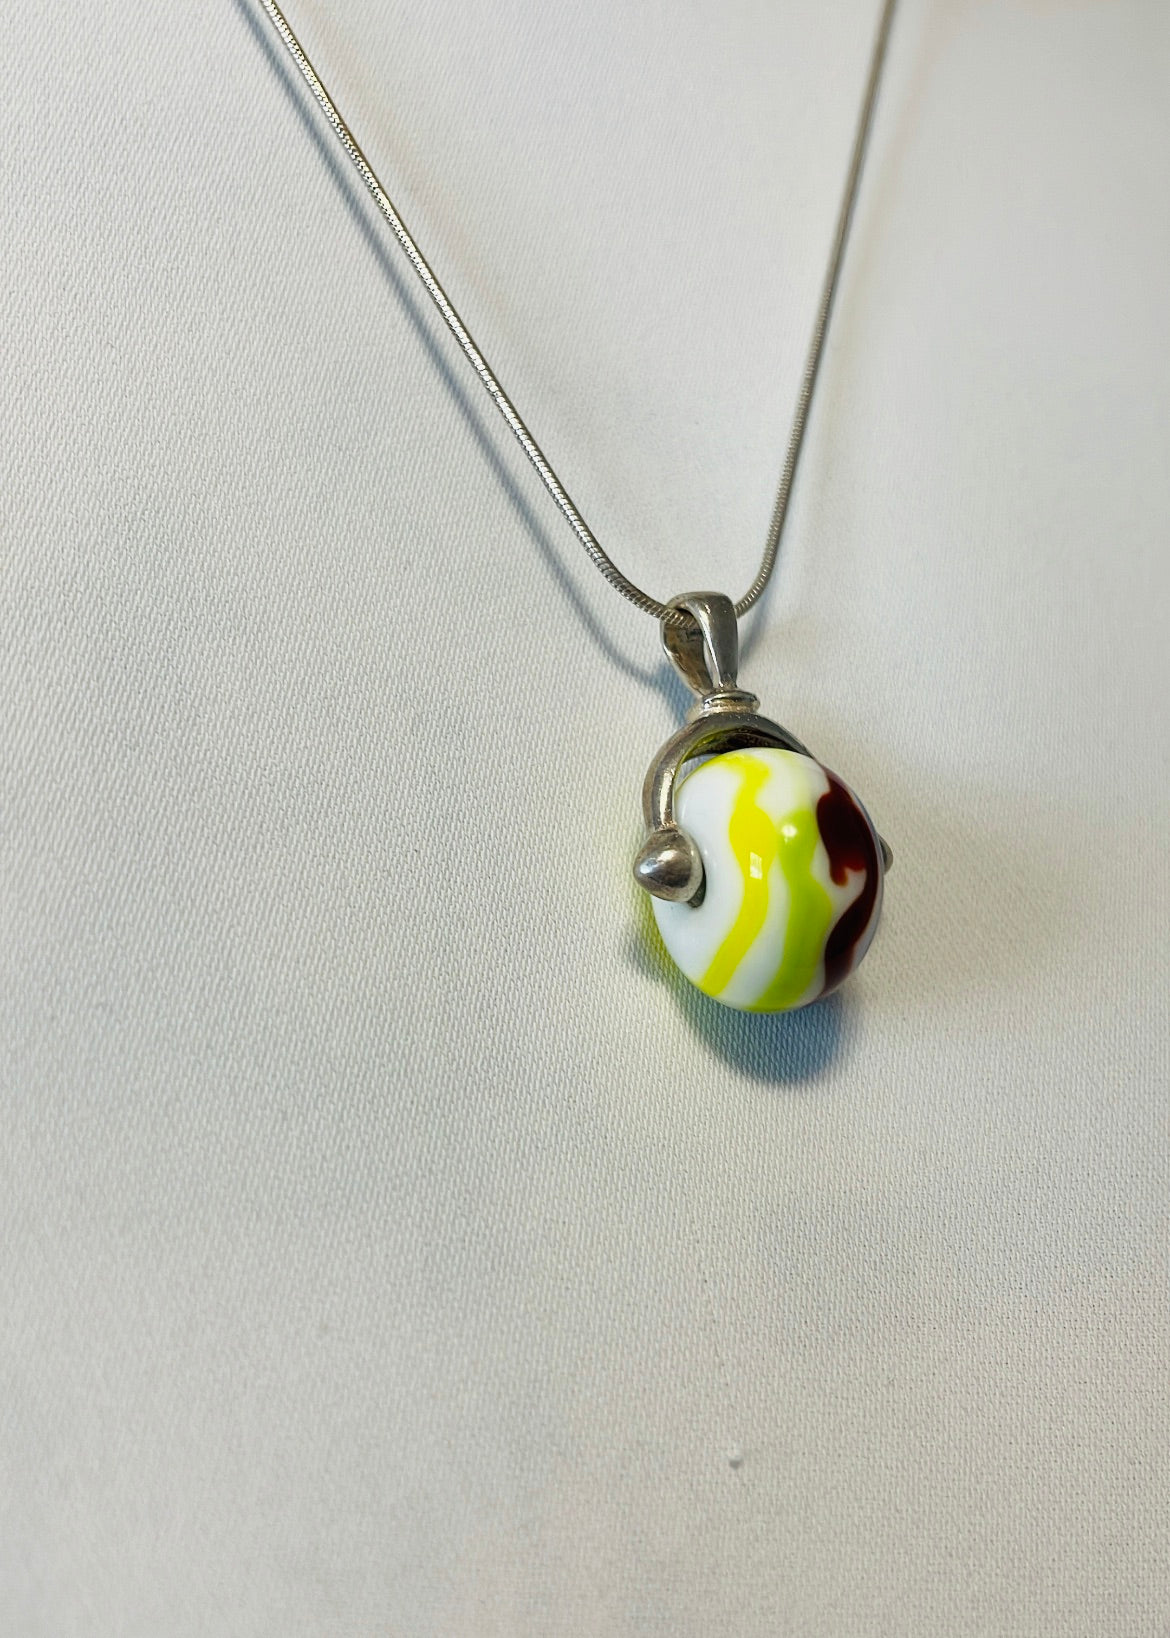 The Blown Glass Necklaces